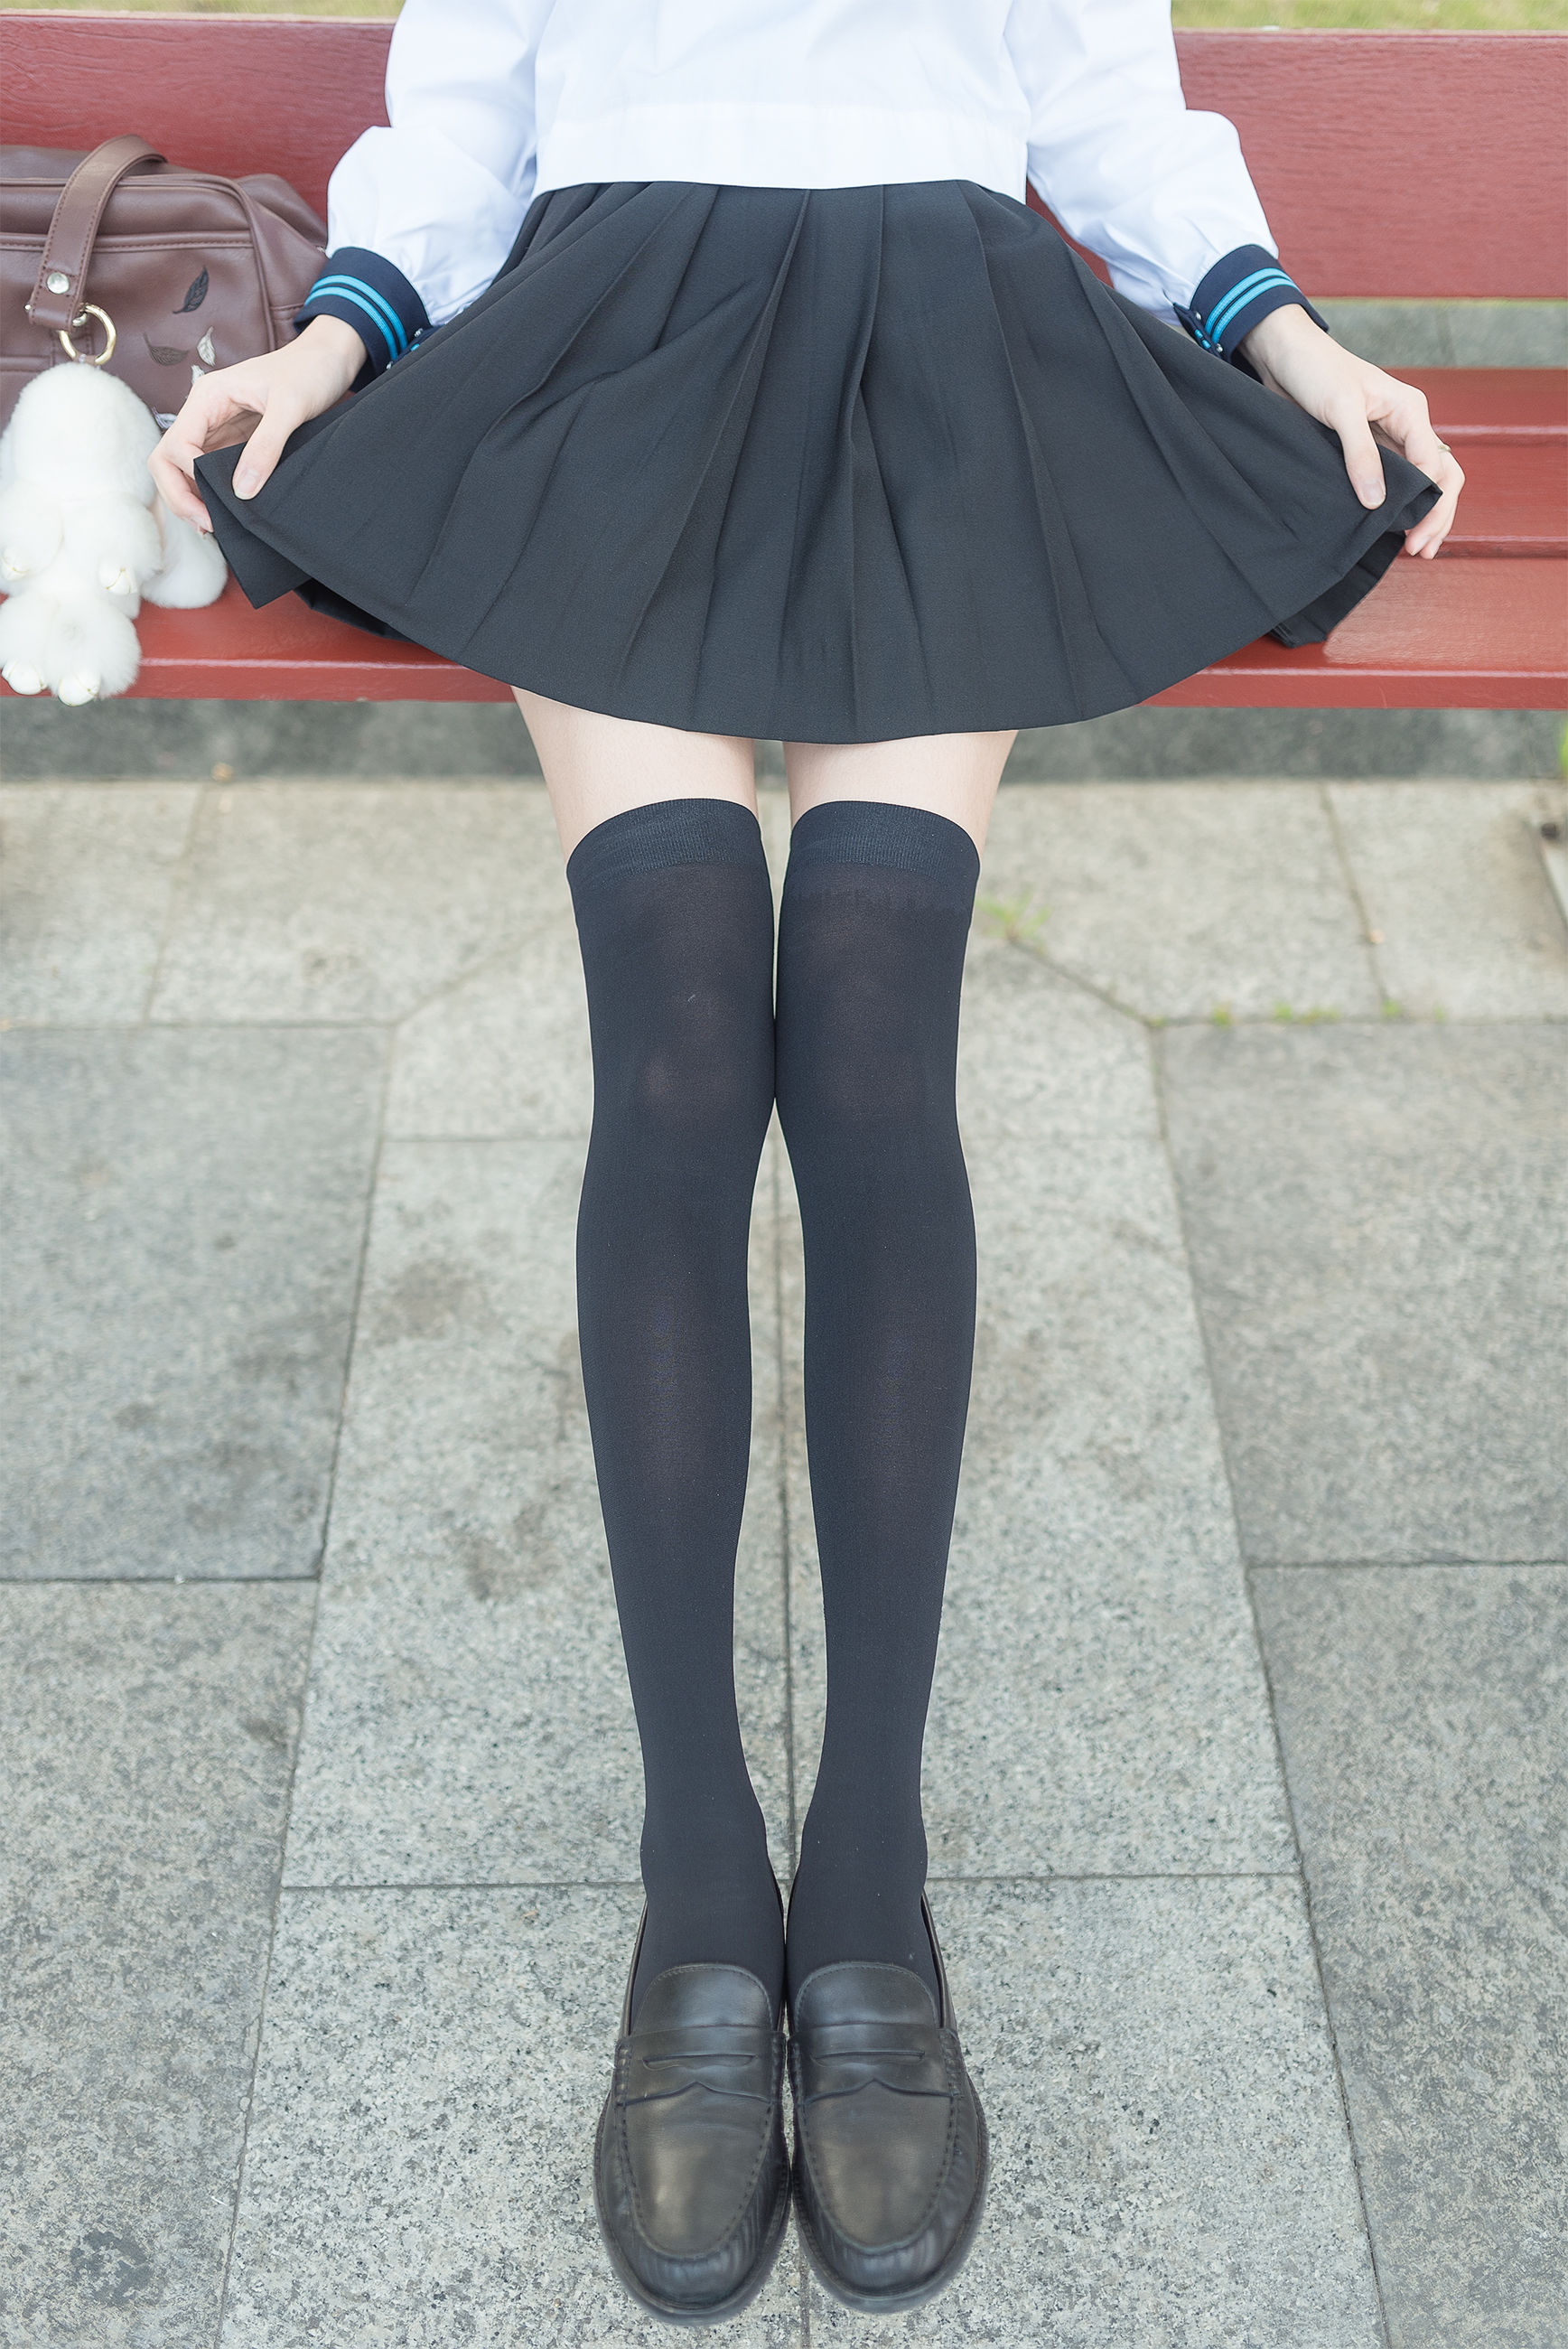 [Field of Wind] NO.003 Black Silk Beauty Legs Outdoor Photo Collection